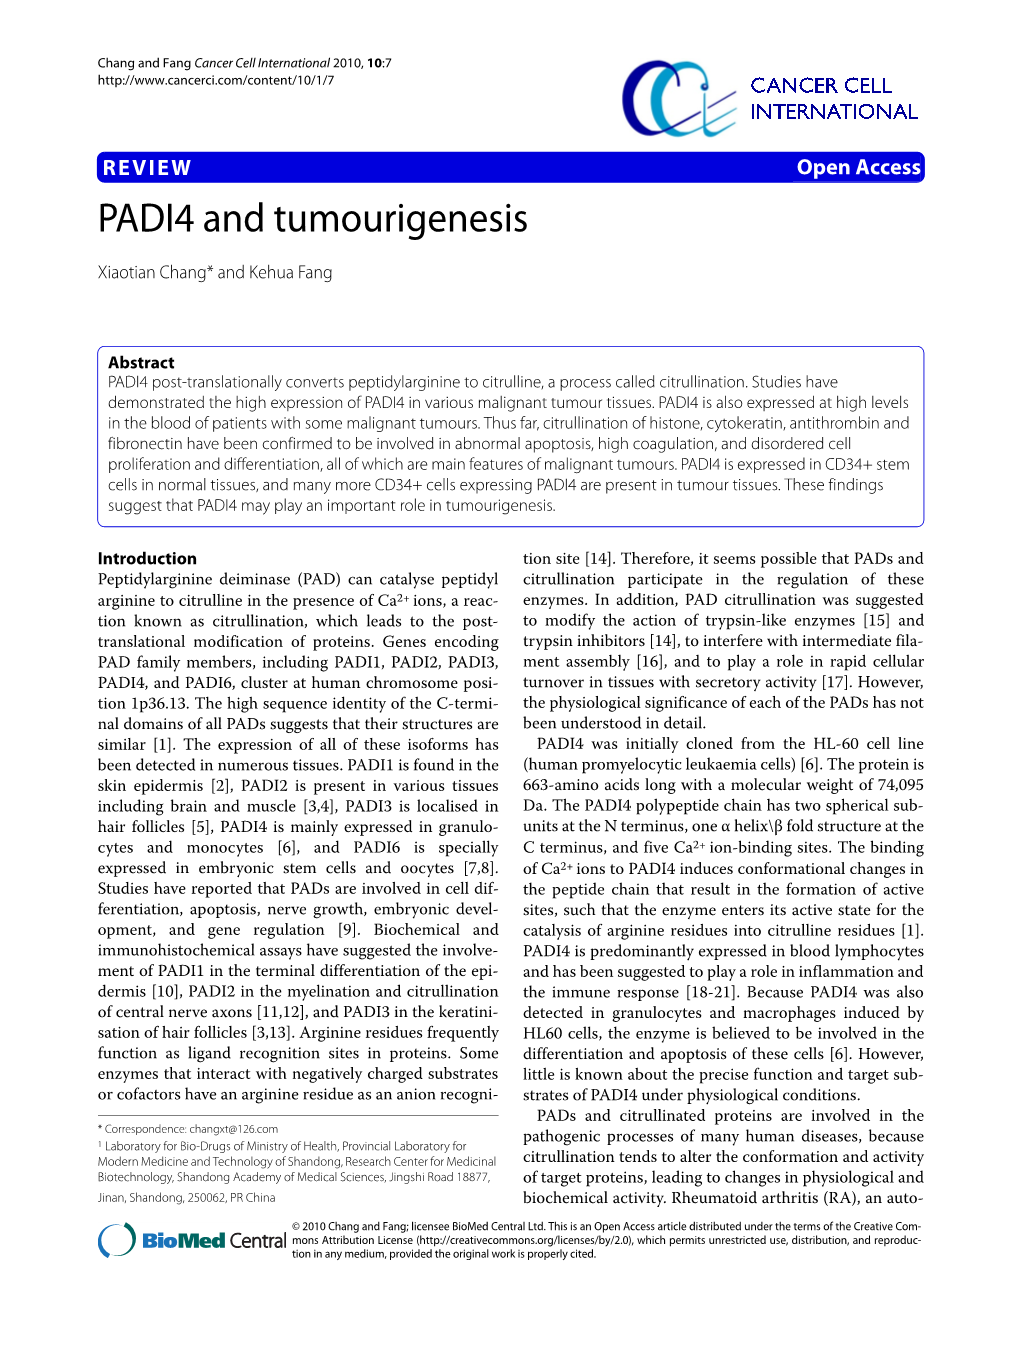 PADI4 and Tumourigenesis Cancer Cell Griffioen AW: Endothelial CD34 Is Suppressed in Human Malignancies: International 2010, 10:7 Role of Angiogenic Factors